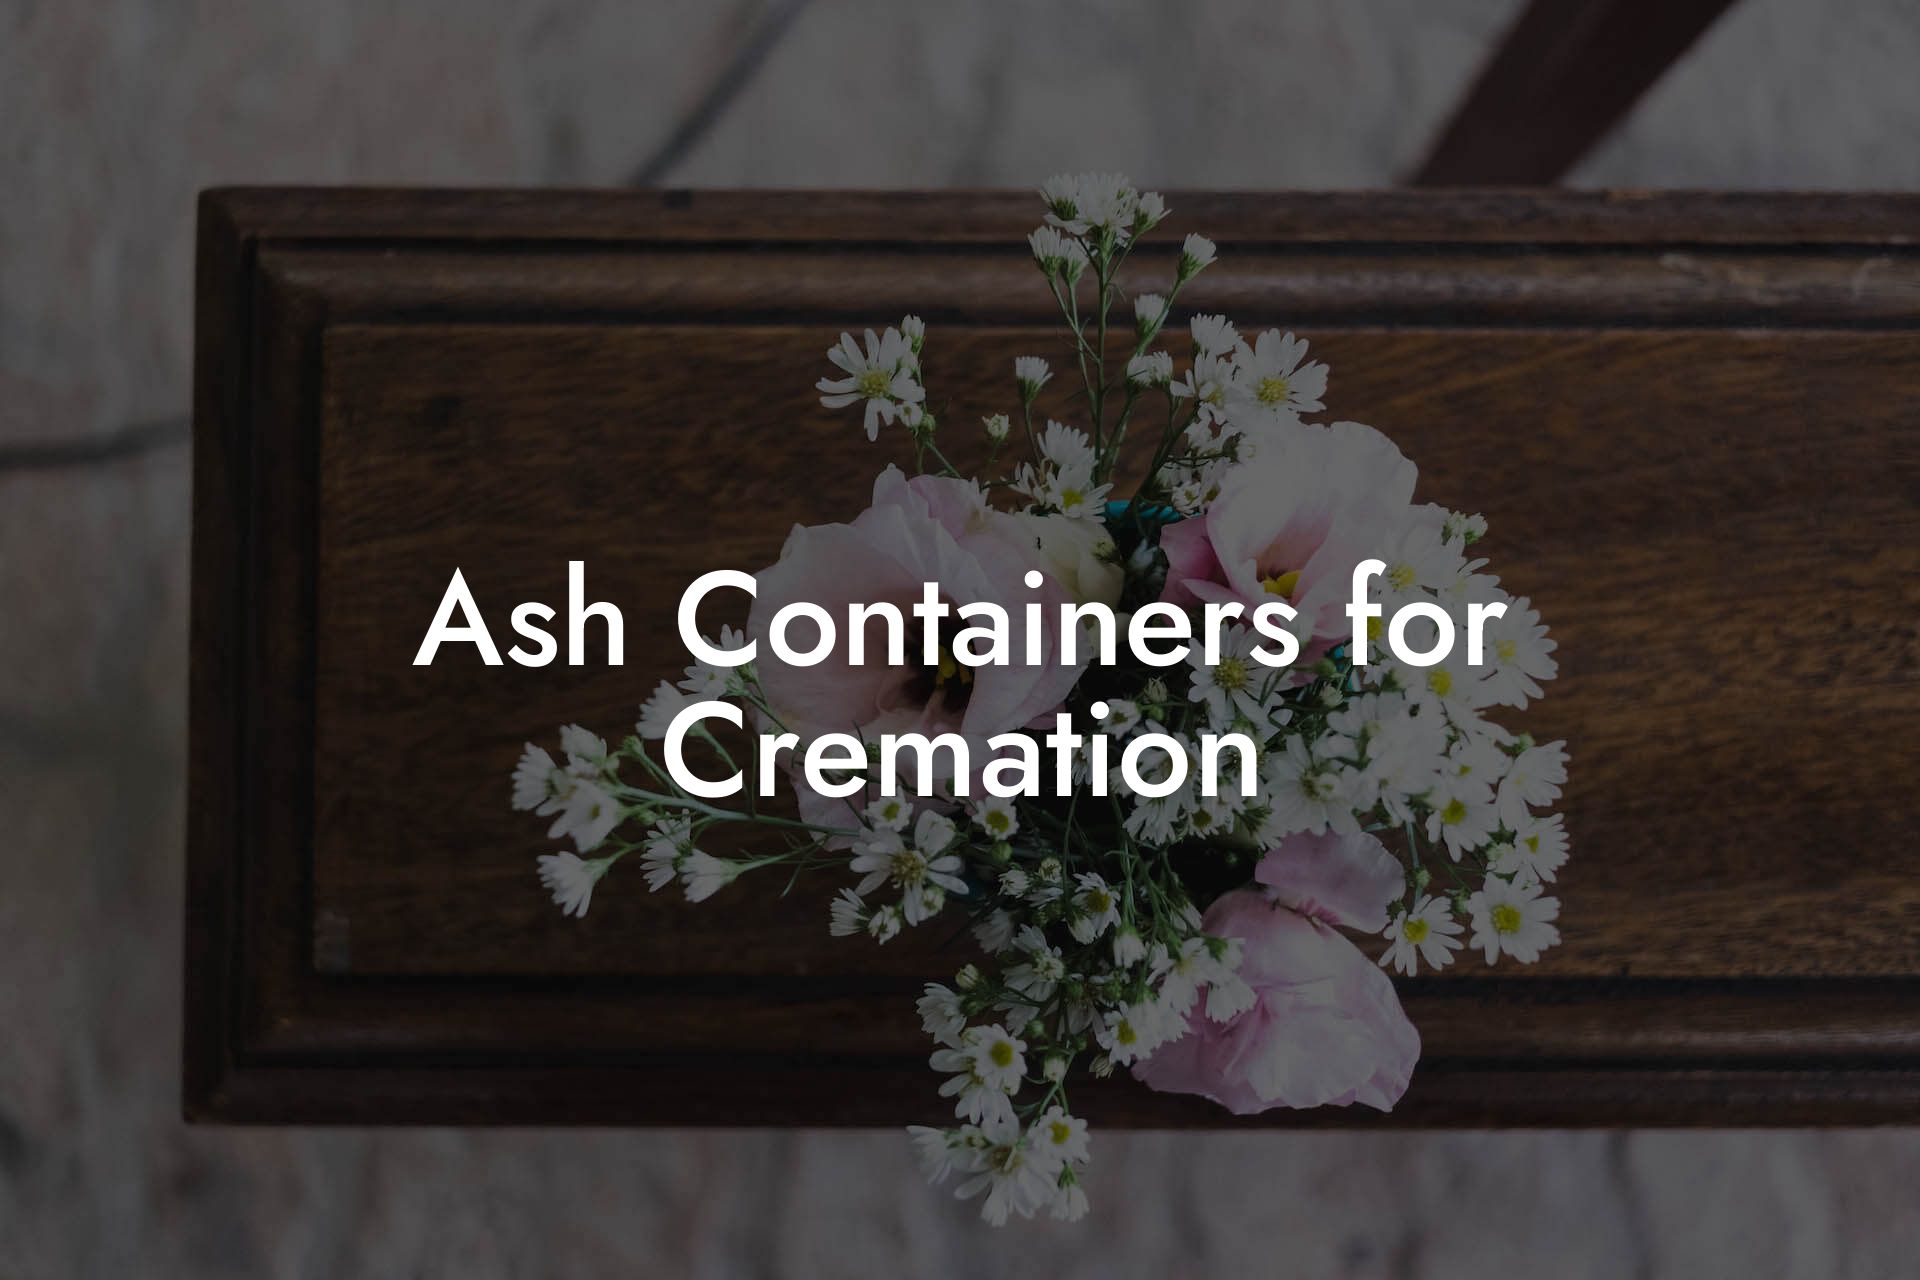 Ash Containers for Cremation